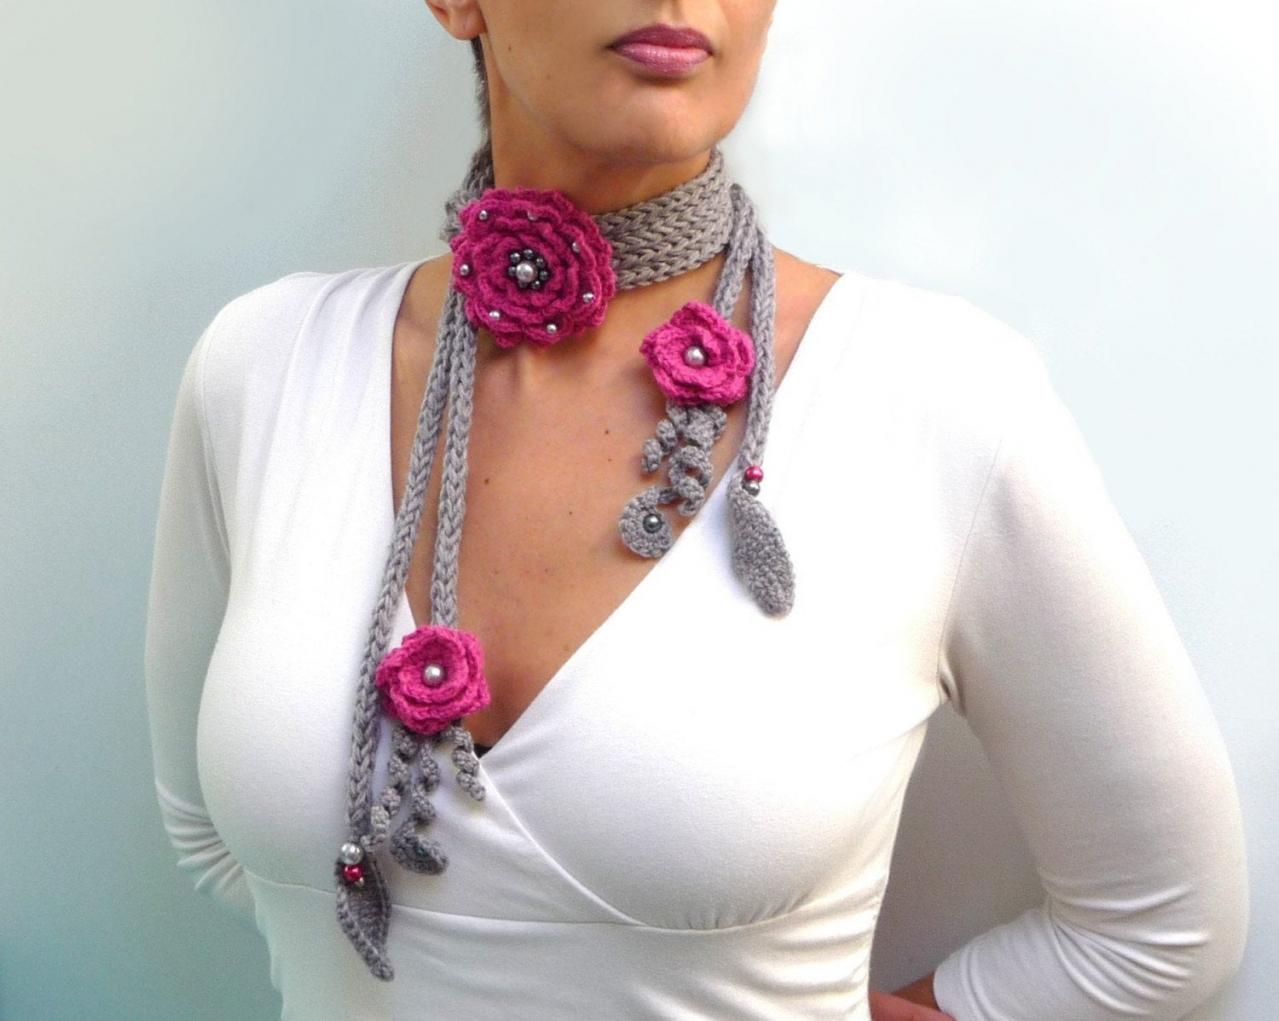 Crochet And Knit Scarf Necklace Or Neckwarmer With Flowers, Leaves And Glass Pearls - Made To Order - Choose Your Colors - Peony